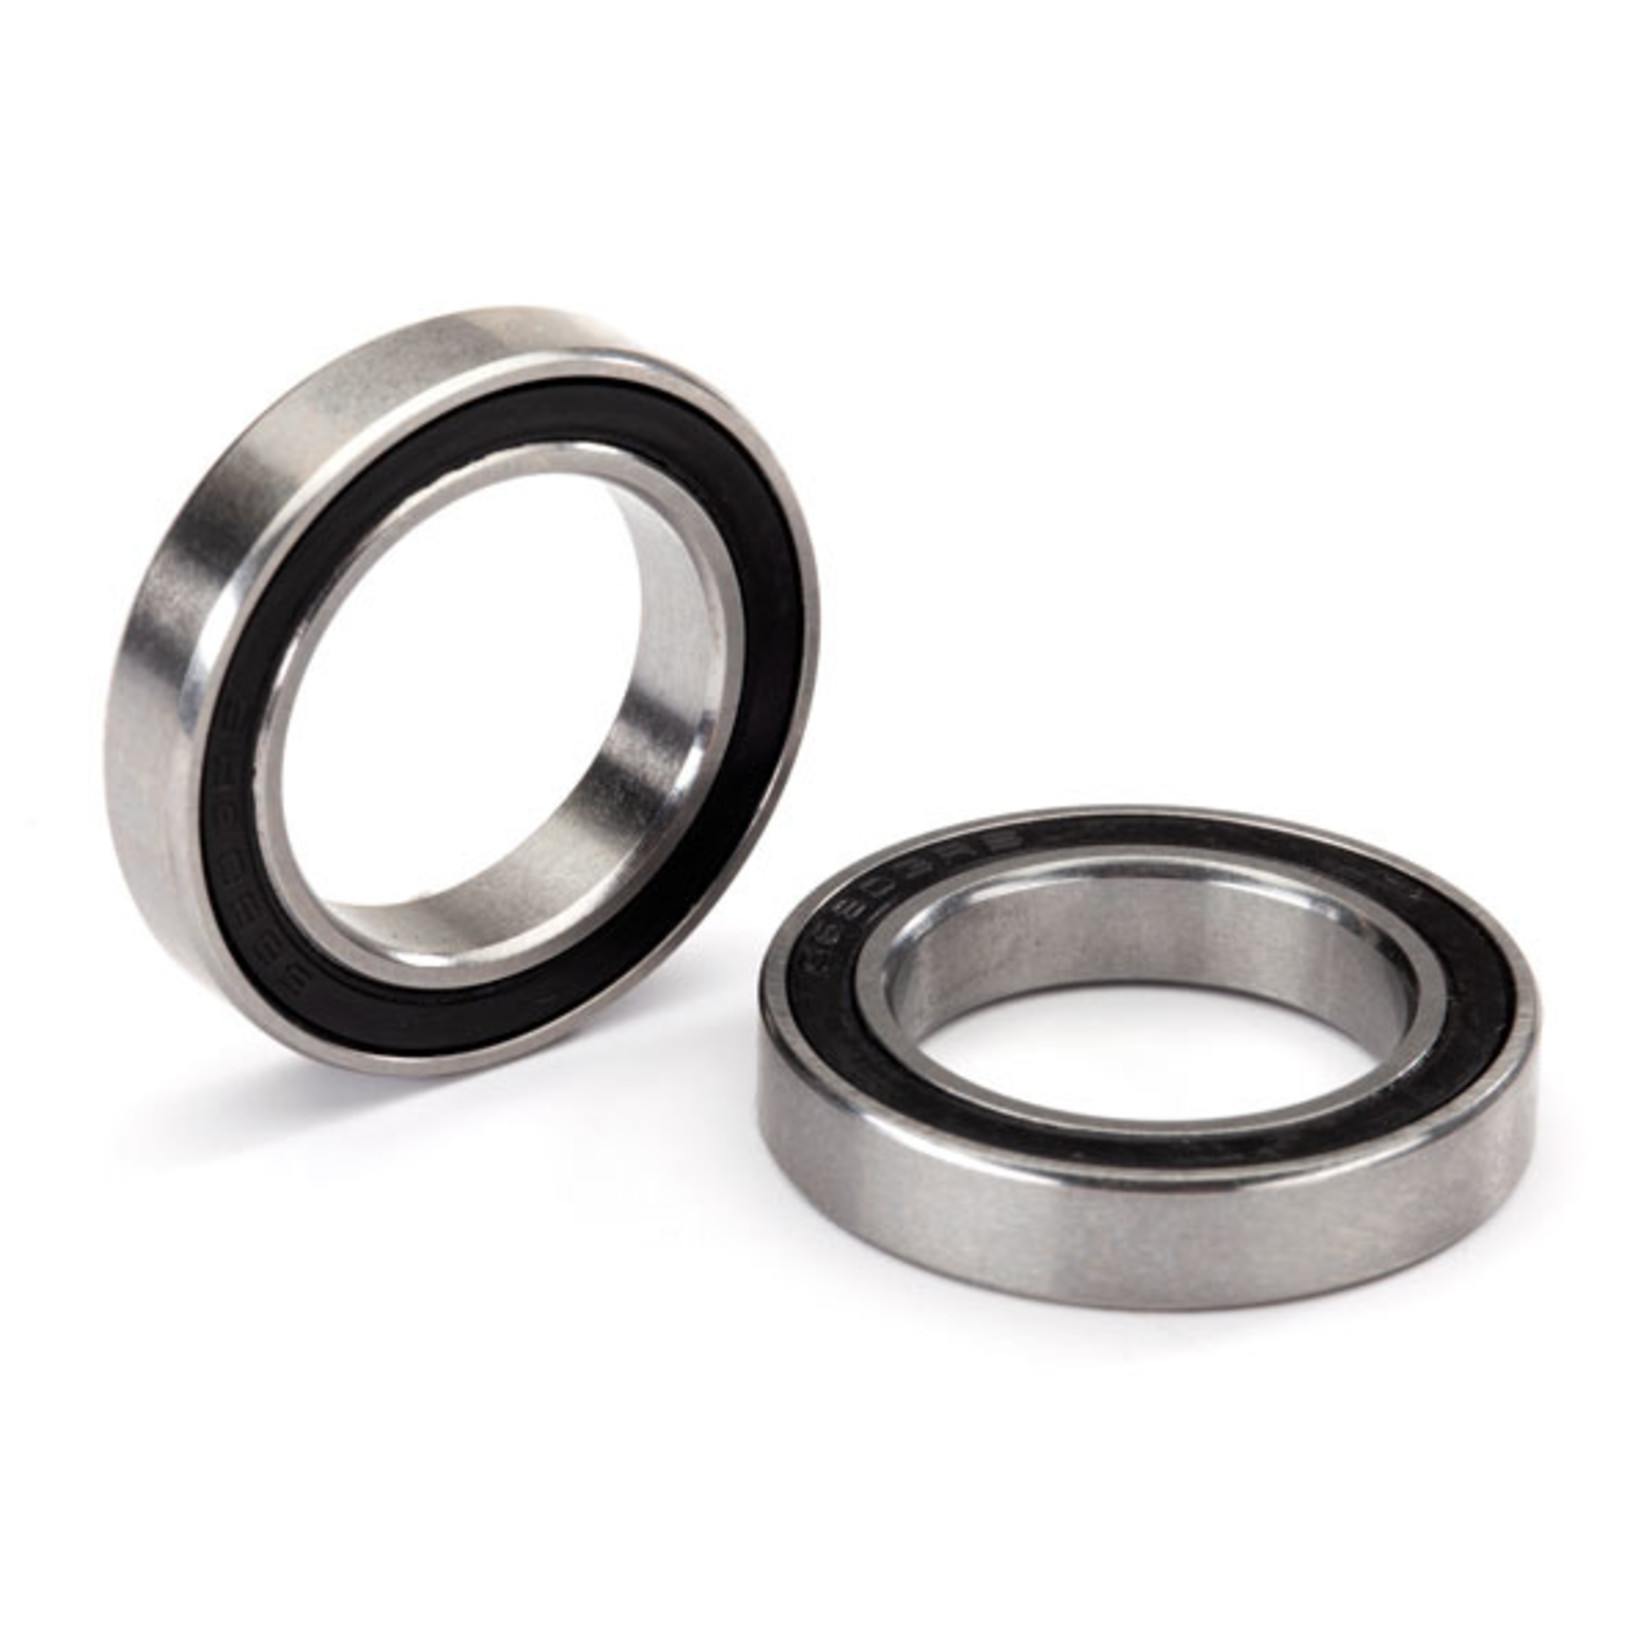 Traxxas 5107X - Ball bearing, black rubber sealed, stainless (1